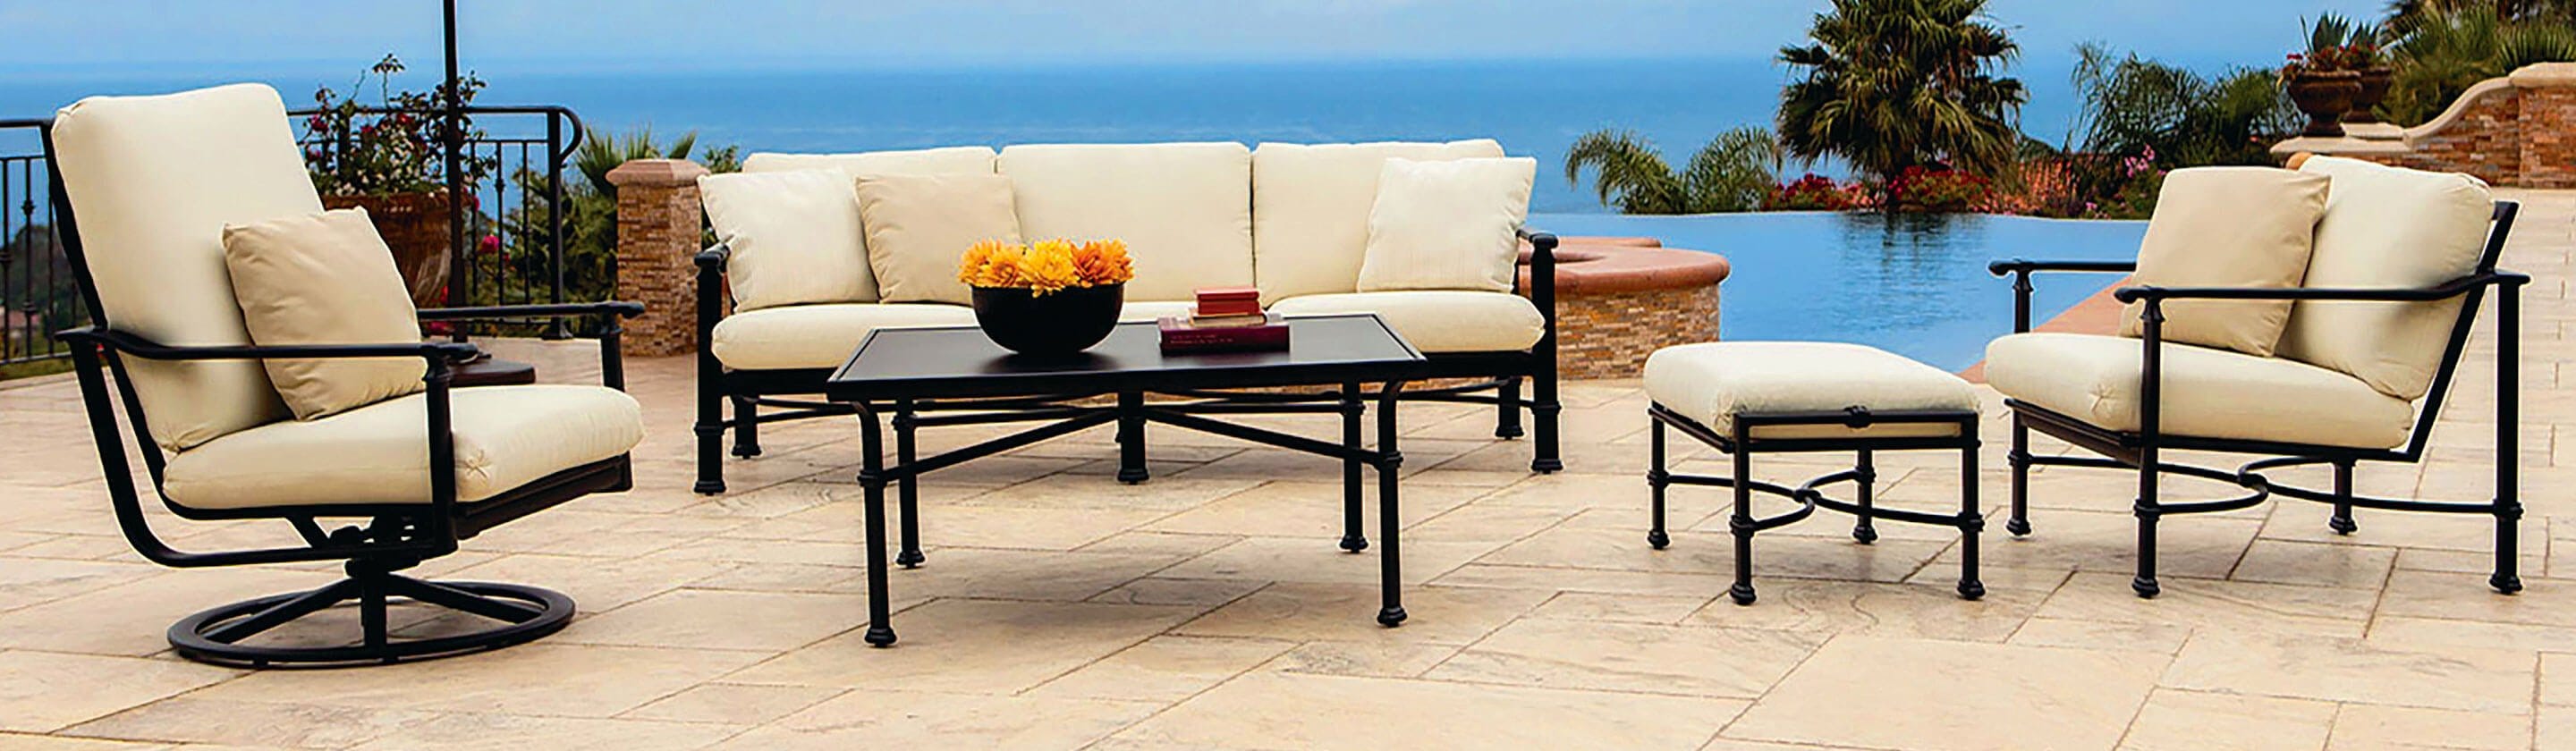 Outdoor Patio Furniture - Outdoor Patio Furniture For Pool